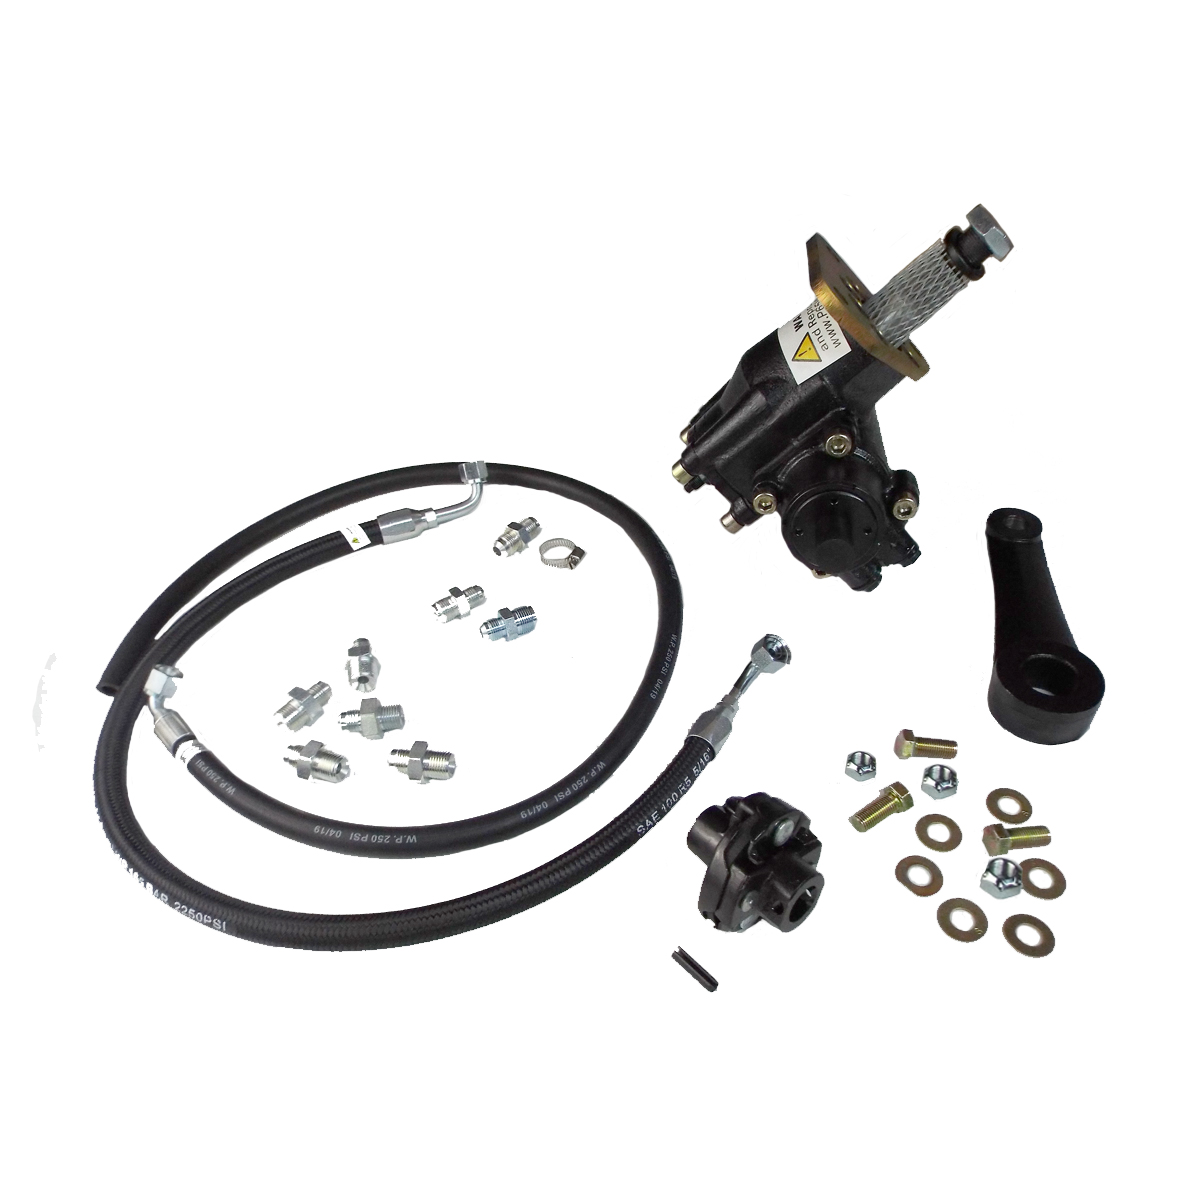 1947-1955 Power Steering Conversion Kit NEW Used with Aftermarket Tilt Chevrolet and GMC Pickup Truck